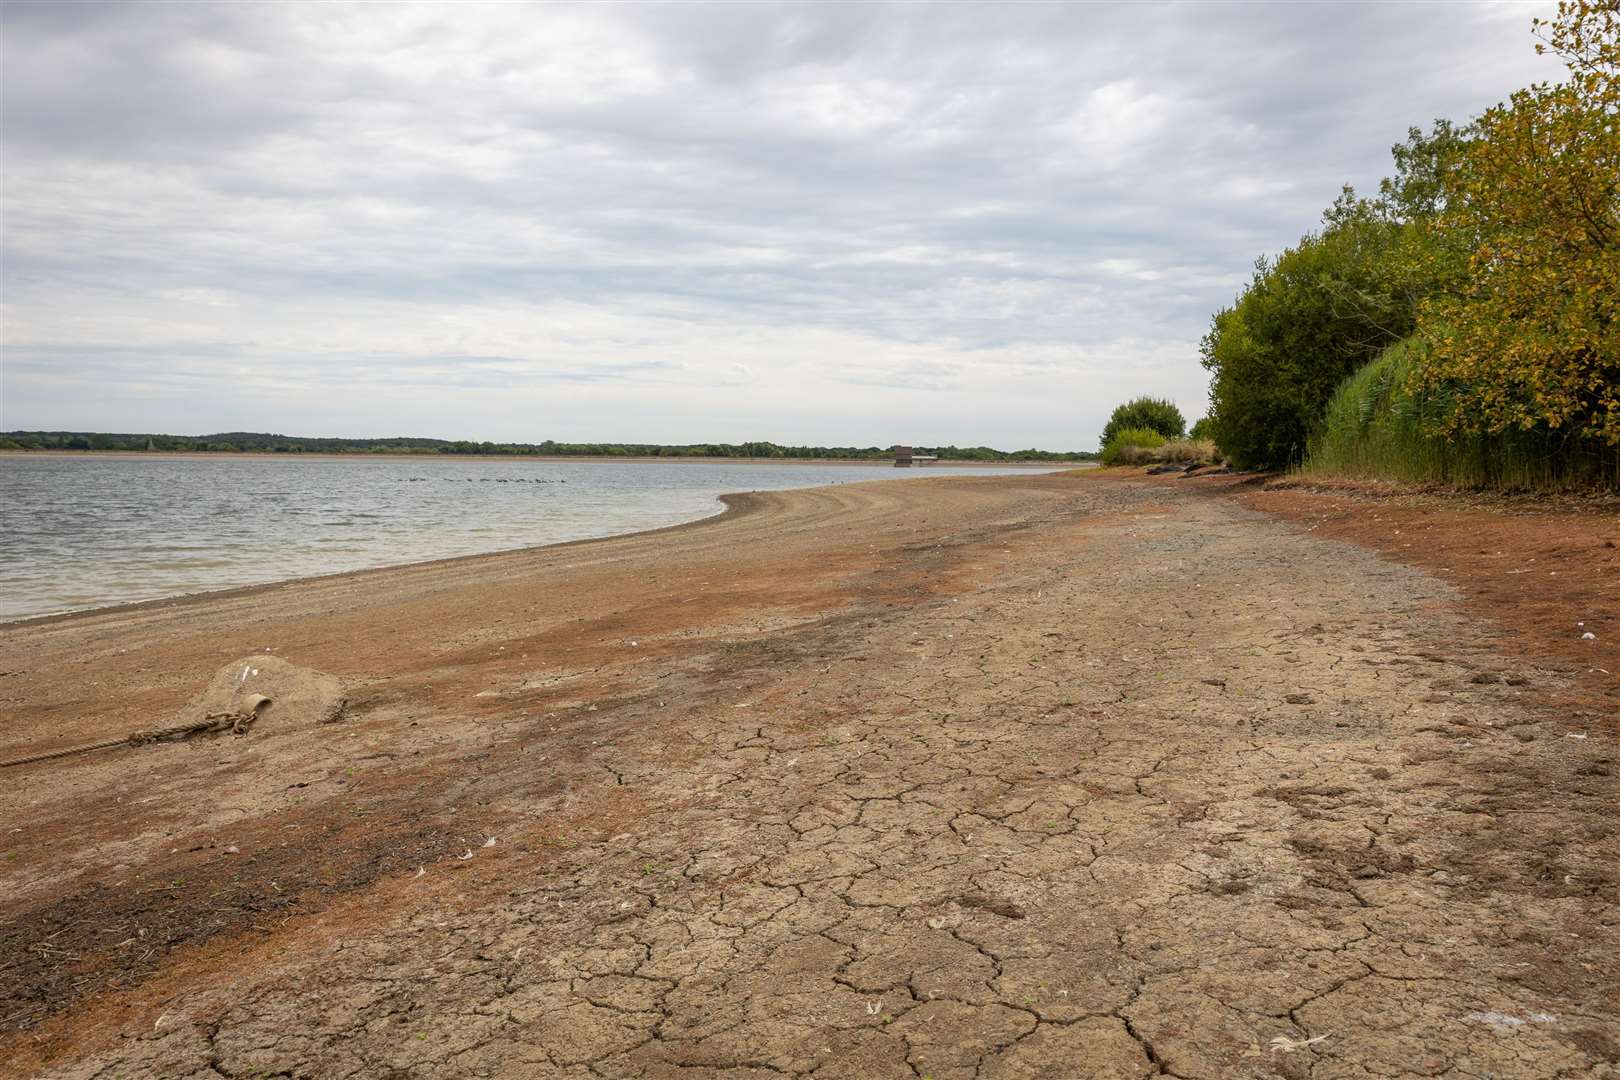 Low water levels and cracked earth at Arlington Reservoir in East Sussex